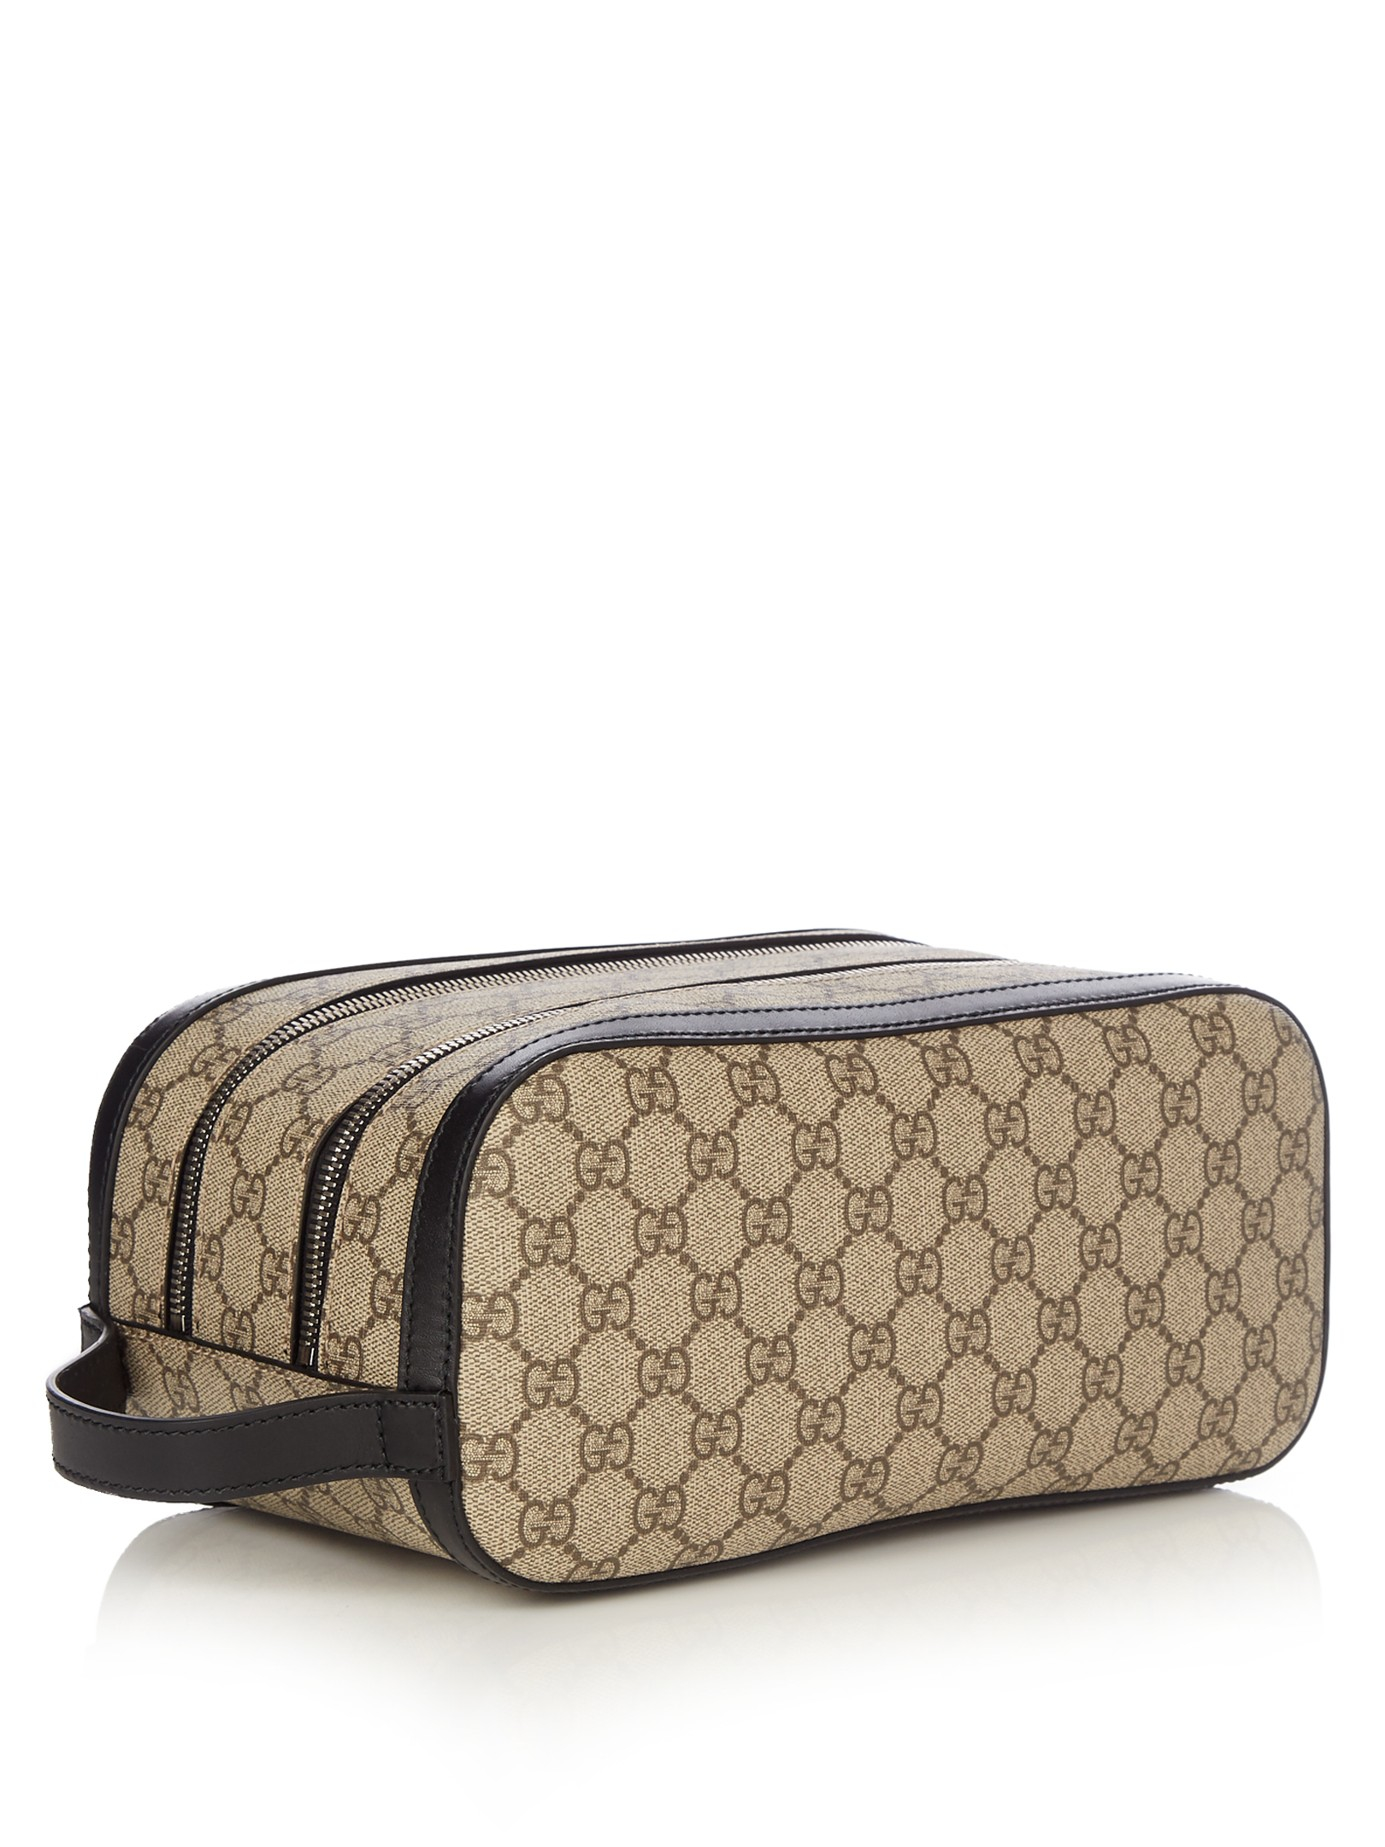 gucci toiletry bag mens, OFF 74%,www 